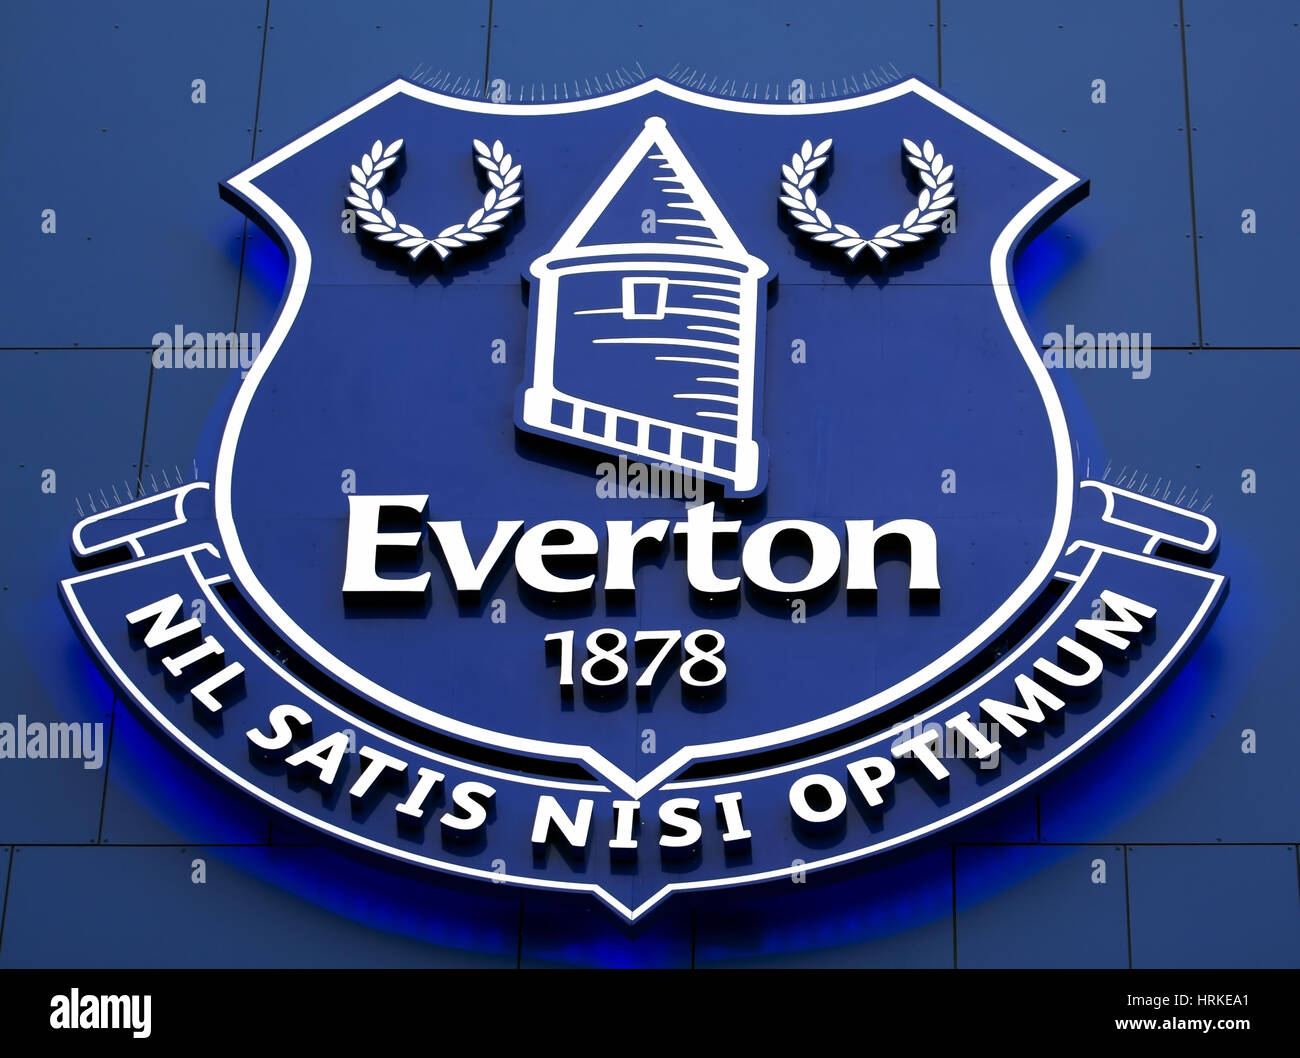 Everton Football Club crest on display on the exterior of Goodison Park Stock Photo